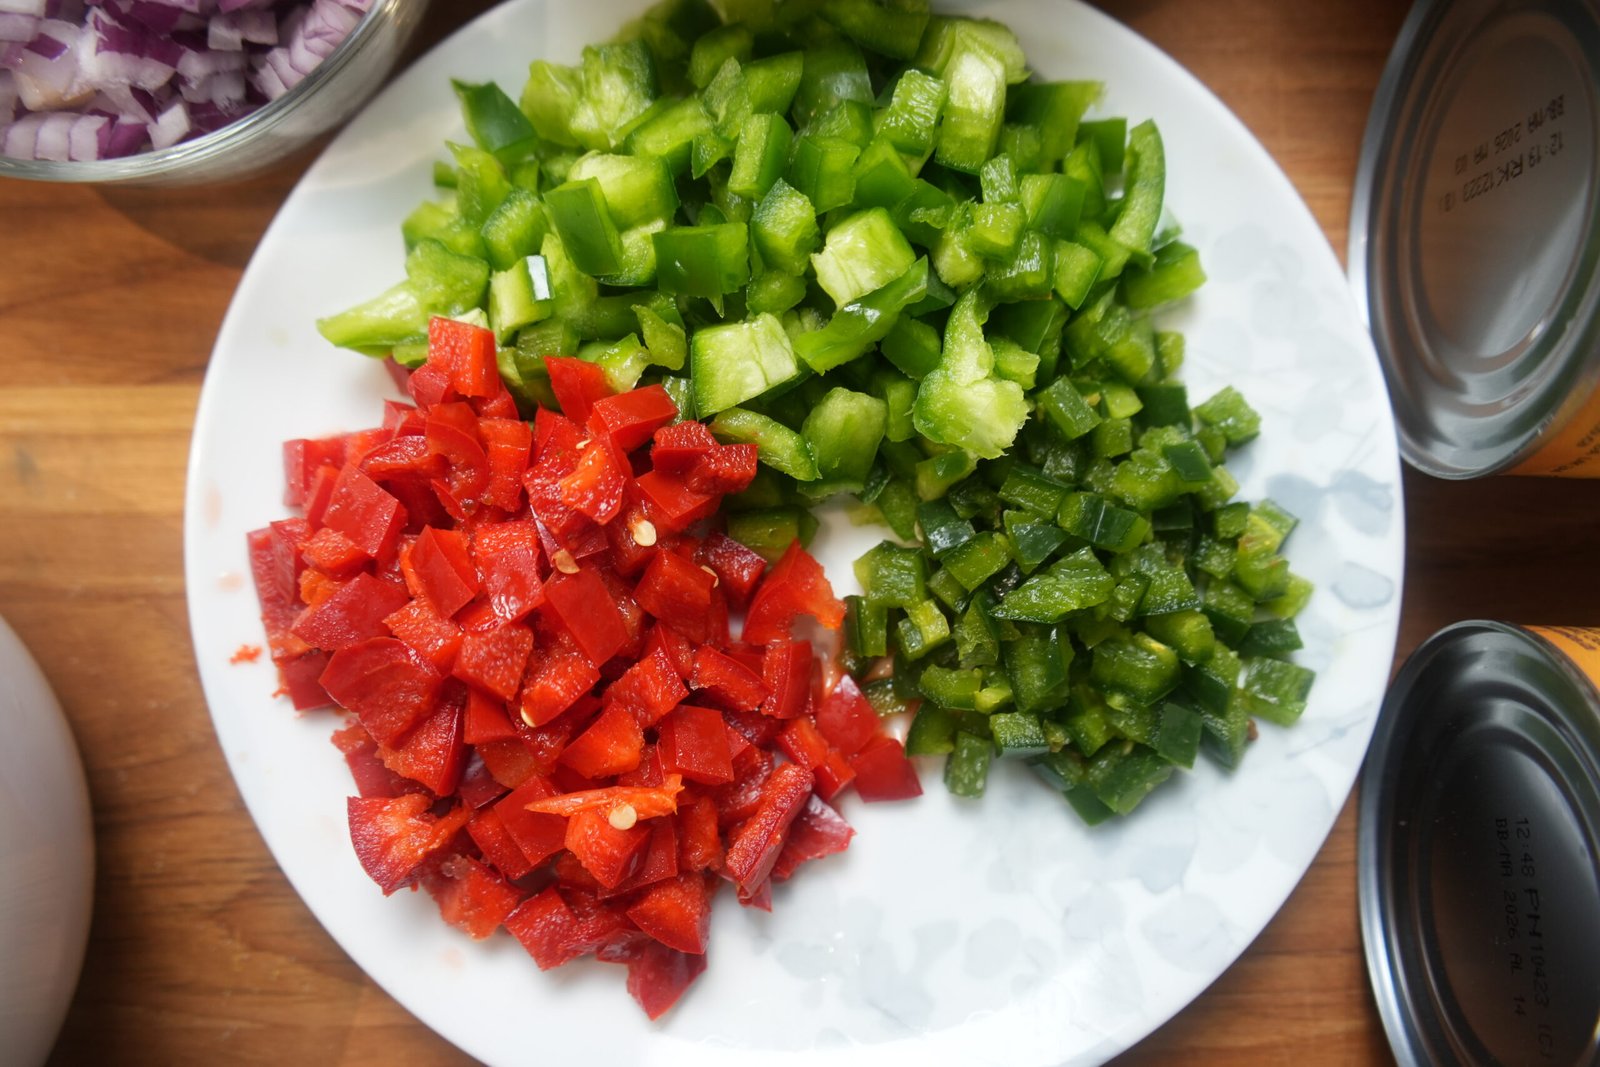 diced red bell pepper diced green bell peppers diced jalapeno